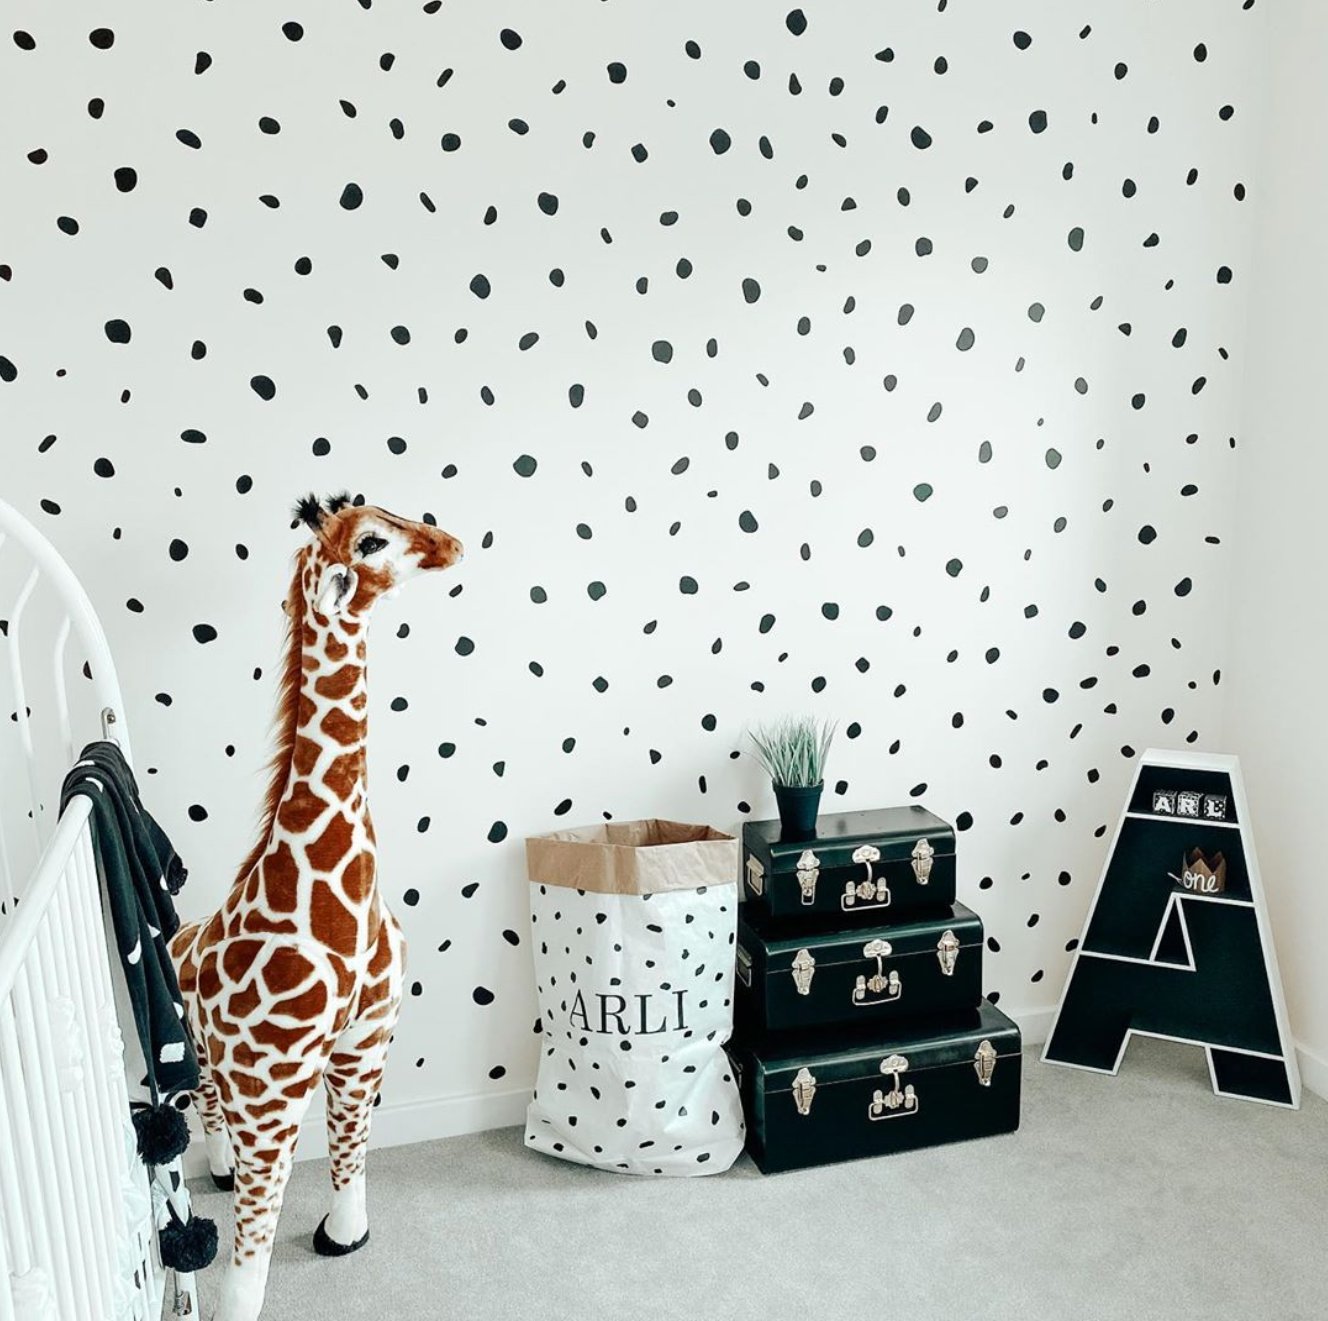 Shapes & Polka Dots Wall Stickers Removable Vinyl Wall Art Stickers